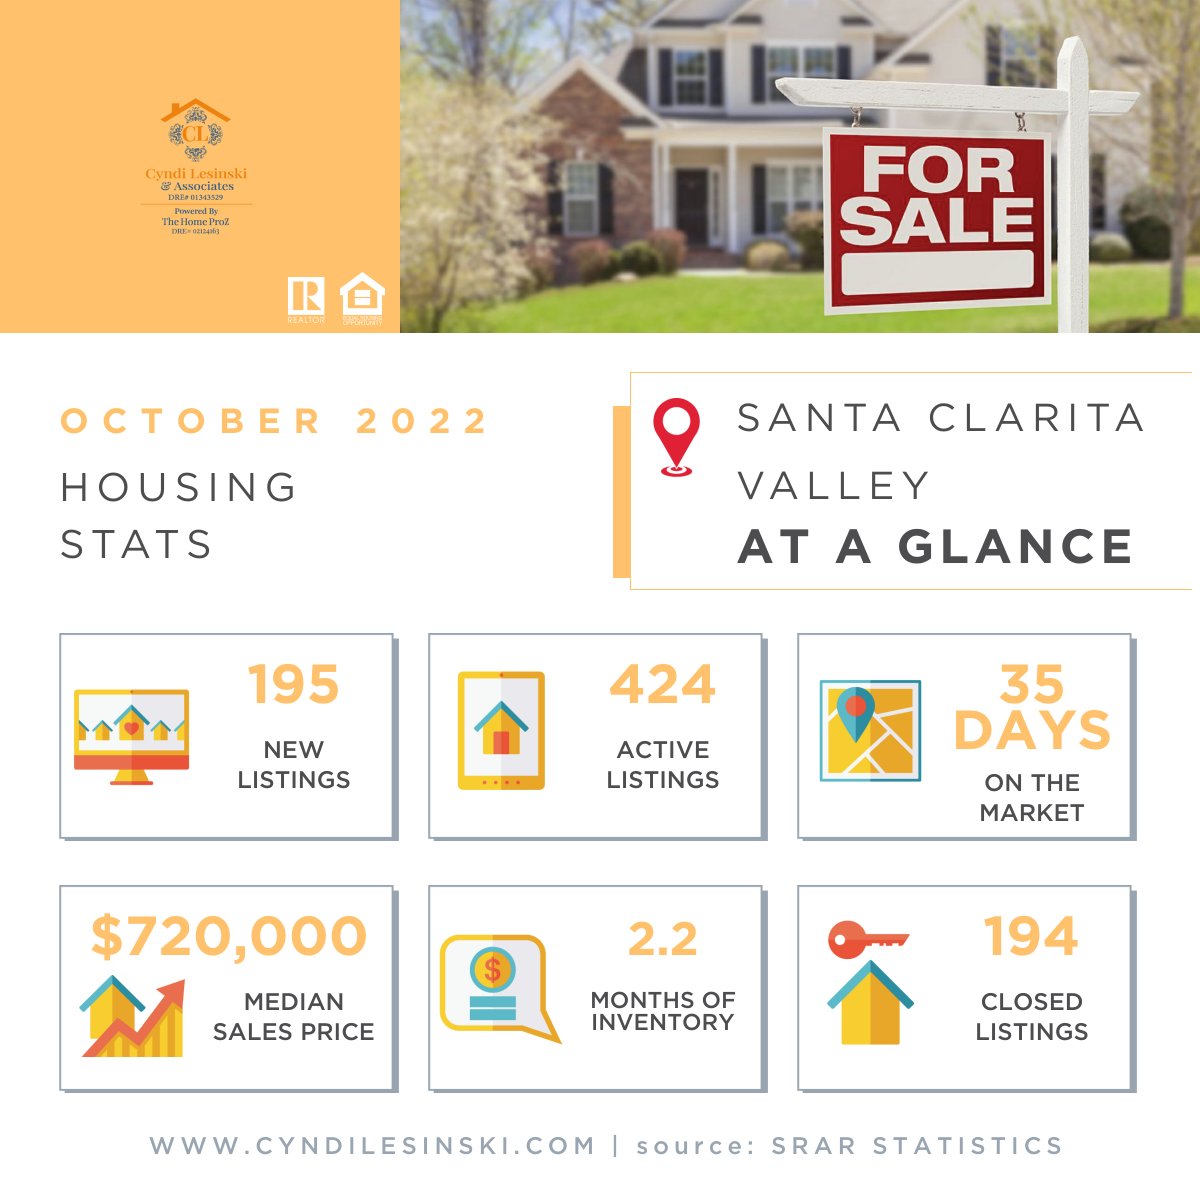 Living in #SCV? Thinking about listing/buying a home in Santa Clarita? 

Here is what's Going on in Your Neighborhood 👇

#HousingMarket #SantaClaritaValley #MarketUpdate #RealtorWithACause #CARealtor #CaliforniaHomes